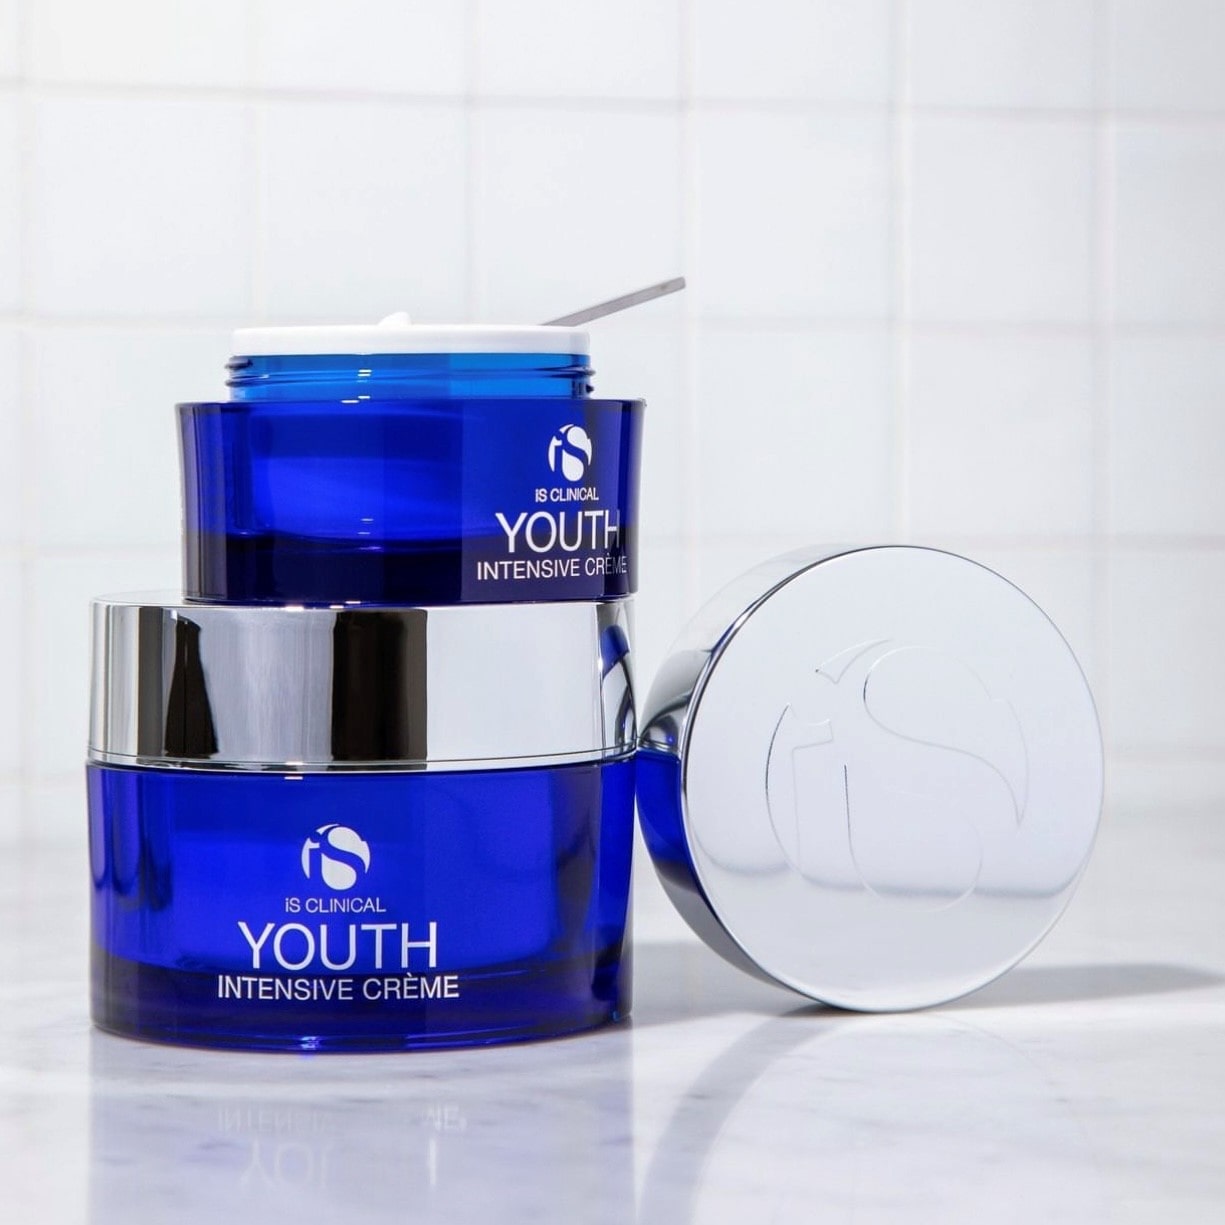 iS CLINICAL Youth Intensive Creme 50ml | skintoheart